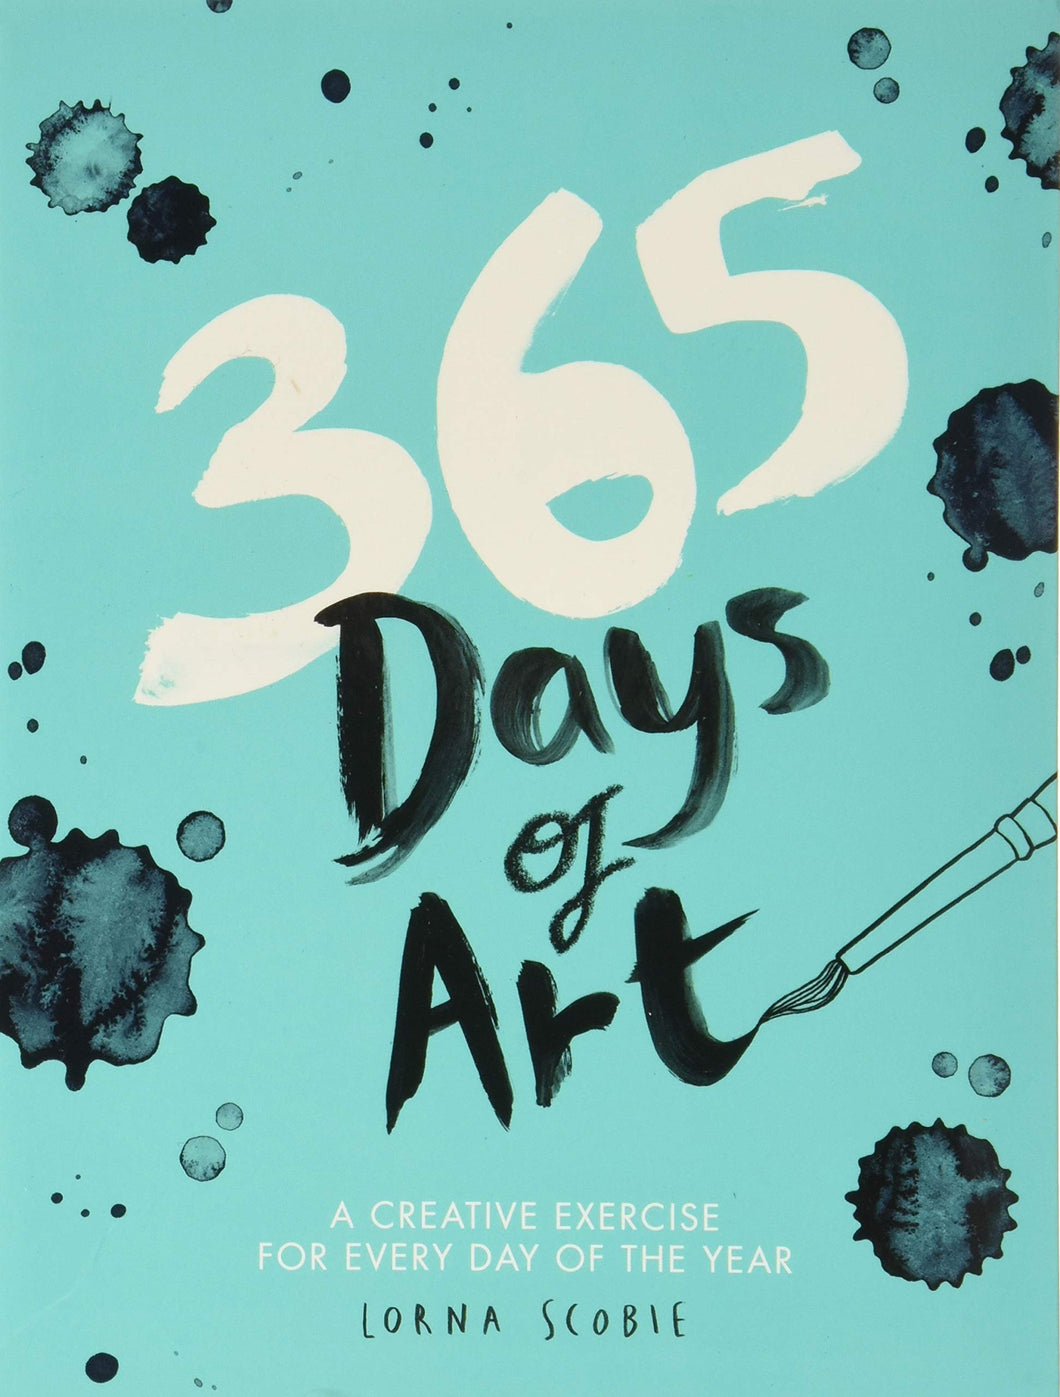 365 Days of Art: A Creative Exercise for Every Day of the Year [Lorna Scobie]